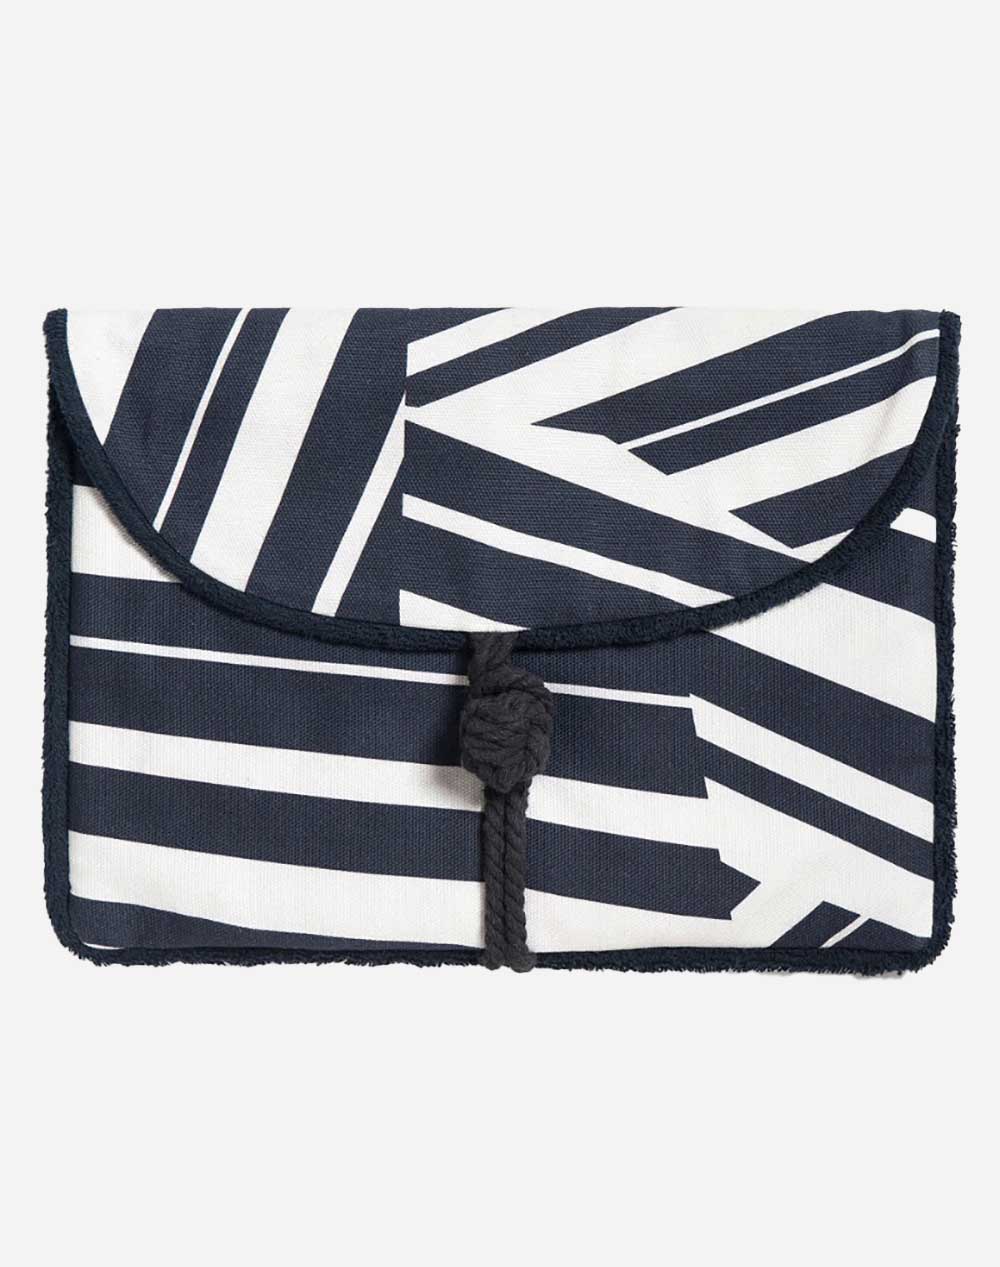 SUN OF A BEACH ATHENS TILES ENVELOPE POUCH ΓΥΝΑΙΚΕΙΟ (Διαστάσεις: 25 x 35 εκ) S21-EN-AT-CNV-BLK-Athens Tiles Multi 0410ASUNO6280015_XR15997